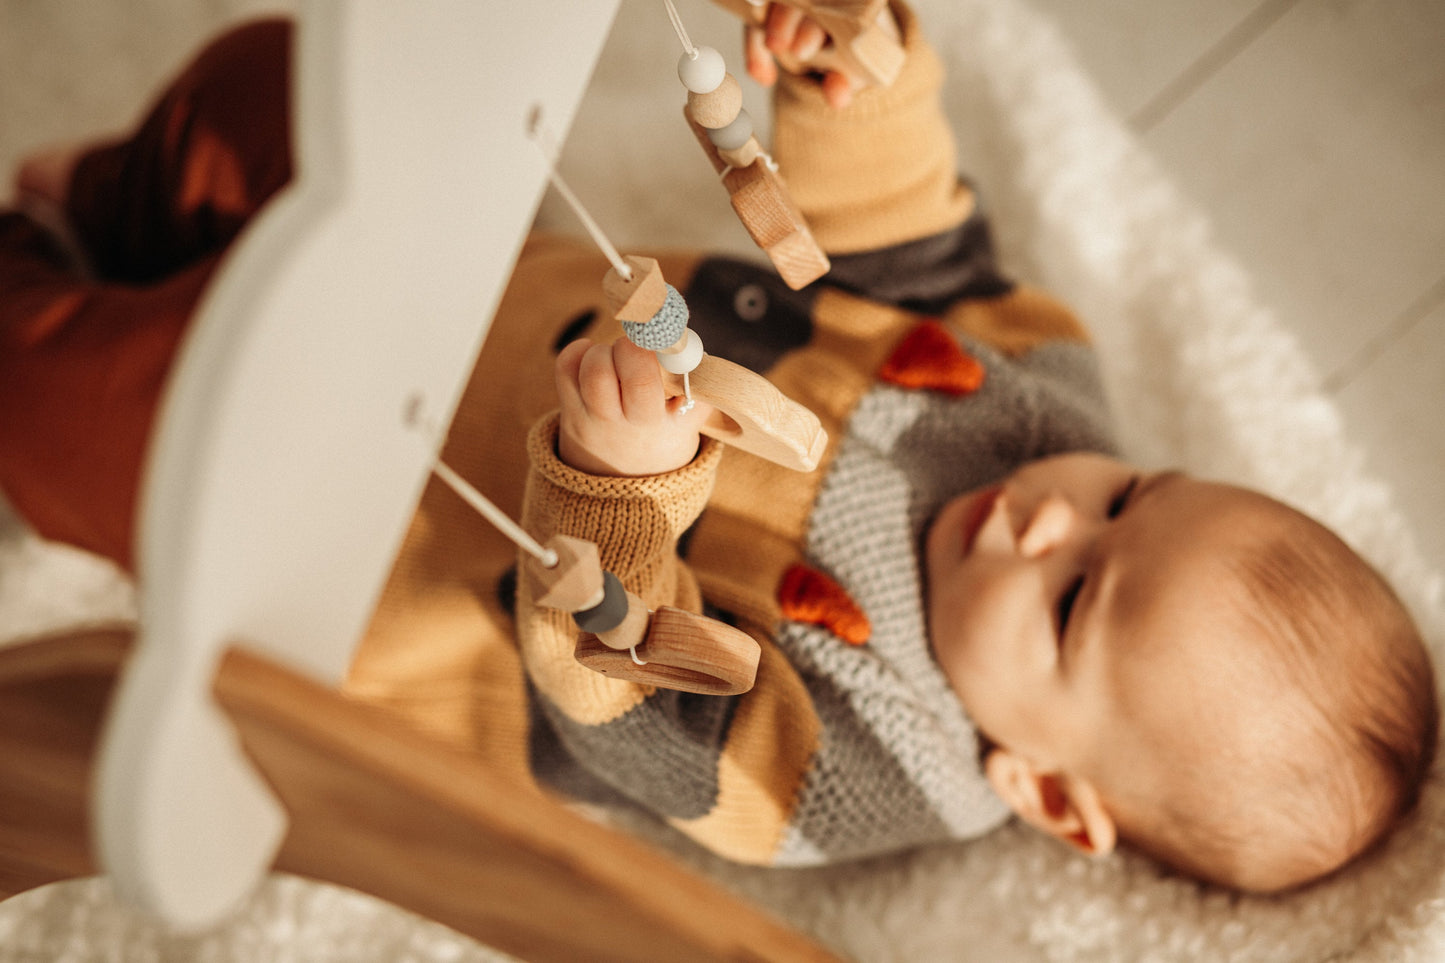 Wooden Baby Gym "Clouds"